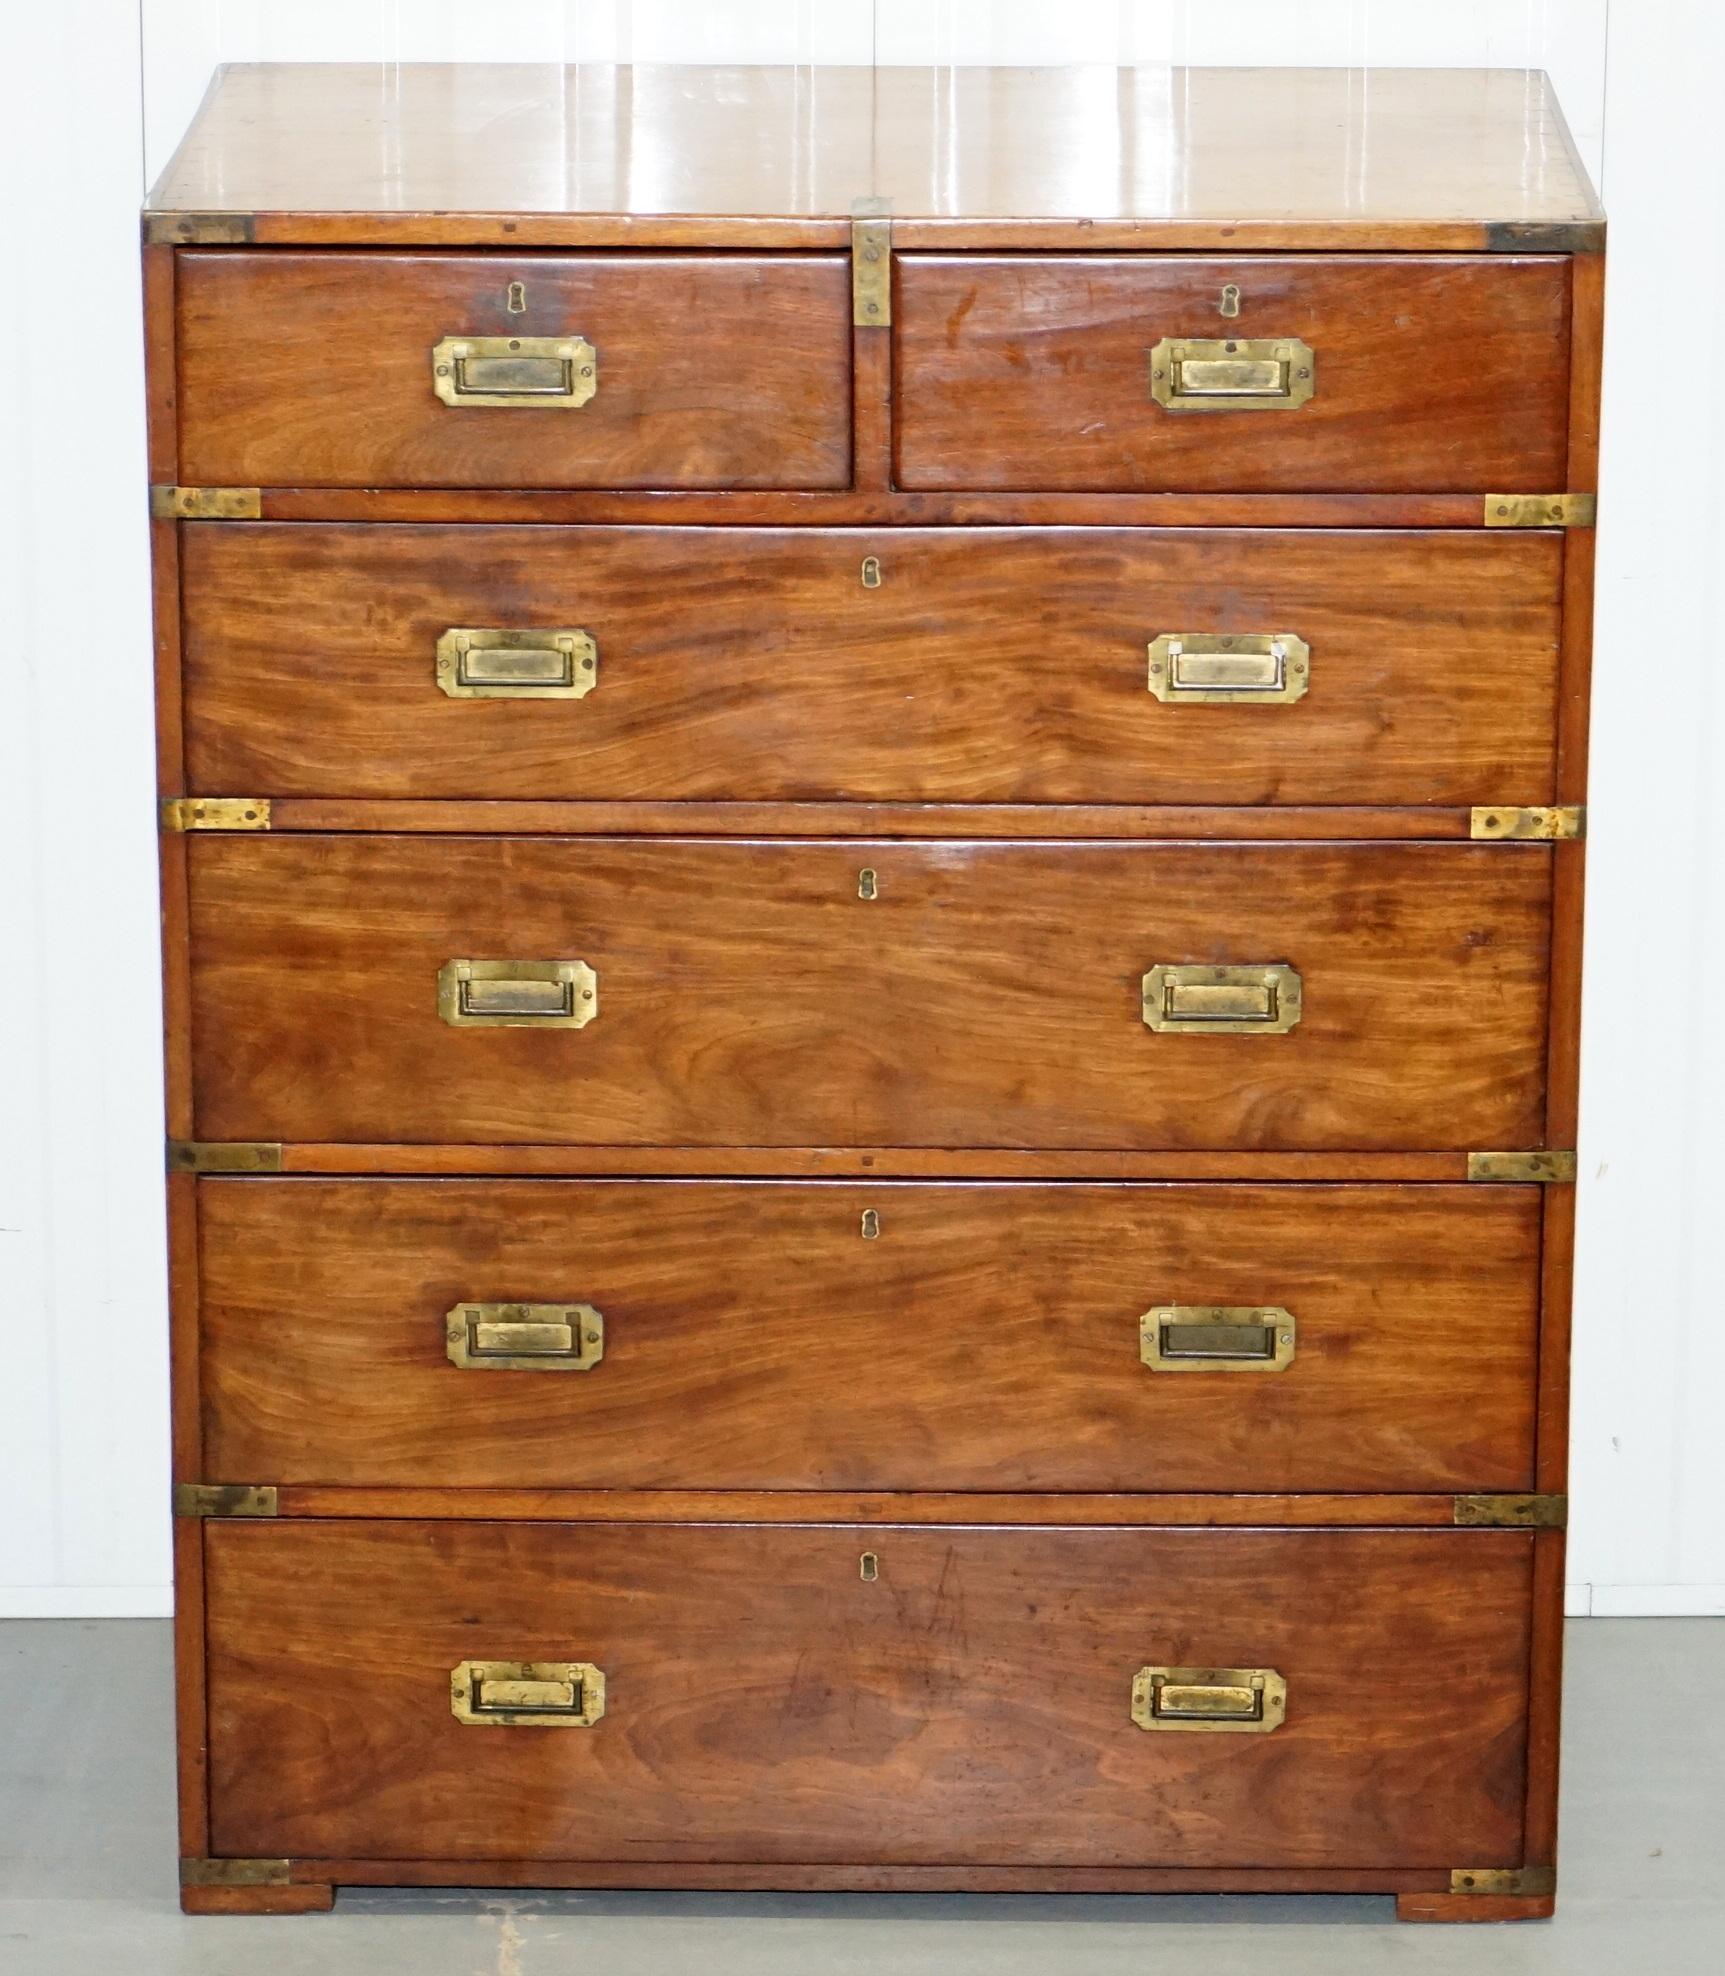 We are delighted to offer for sale lovely very rare solid mahogany with brass trim Military officers campaign chest of drawers, circa 1870.

These are exceptionally rare, six drawers five-tier versions of these absolutely never come up for sale,